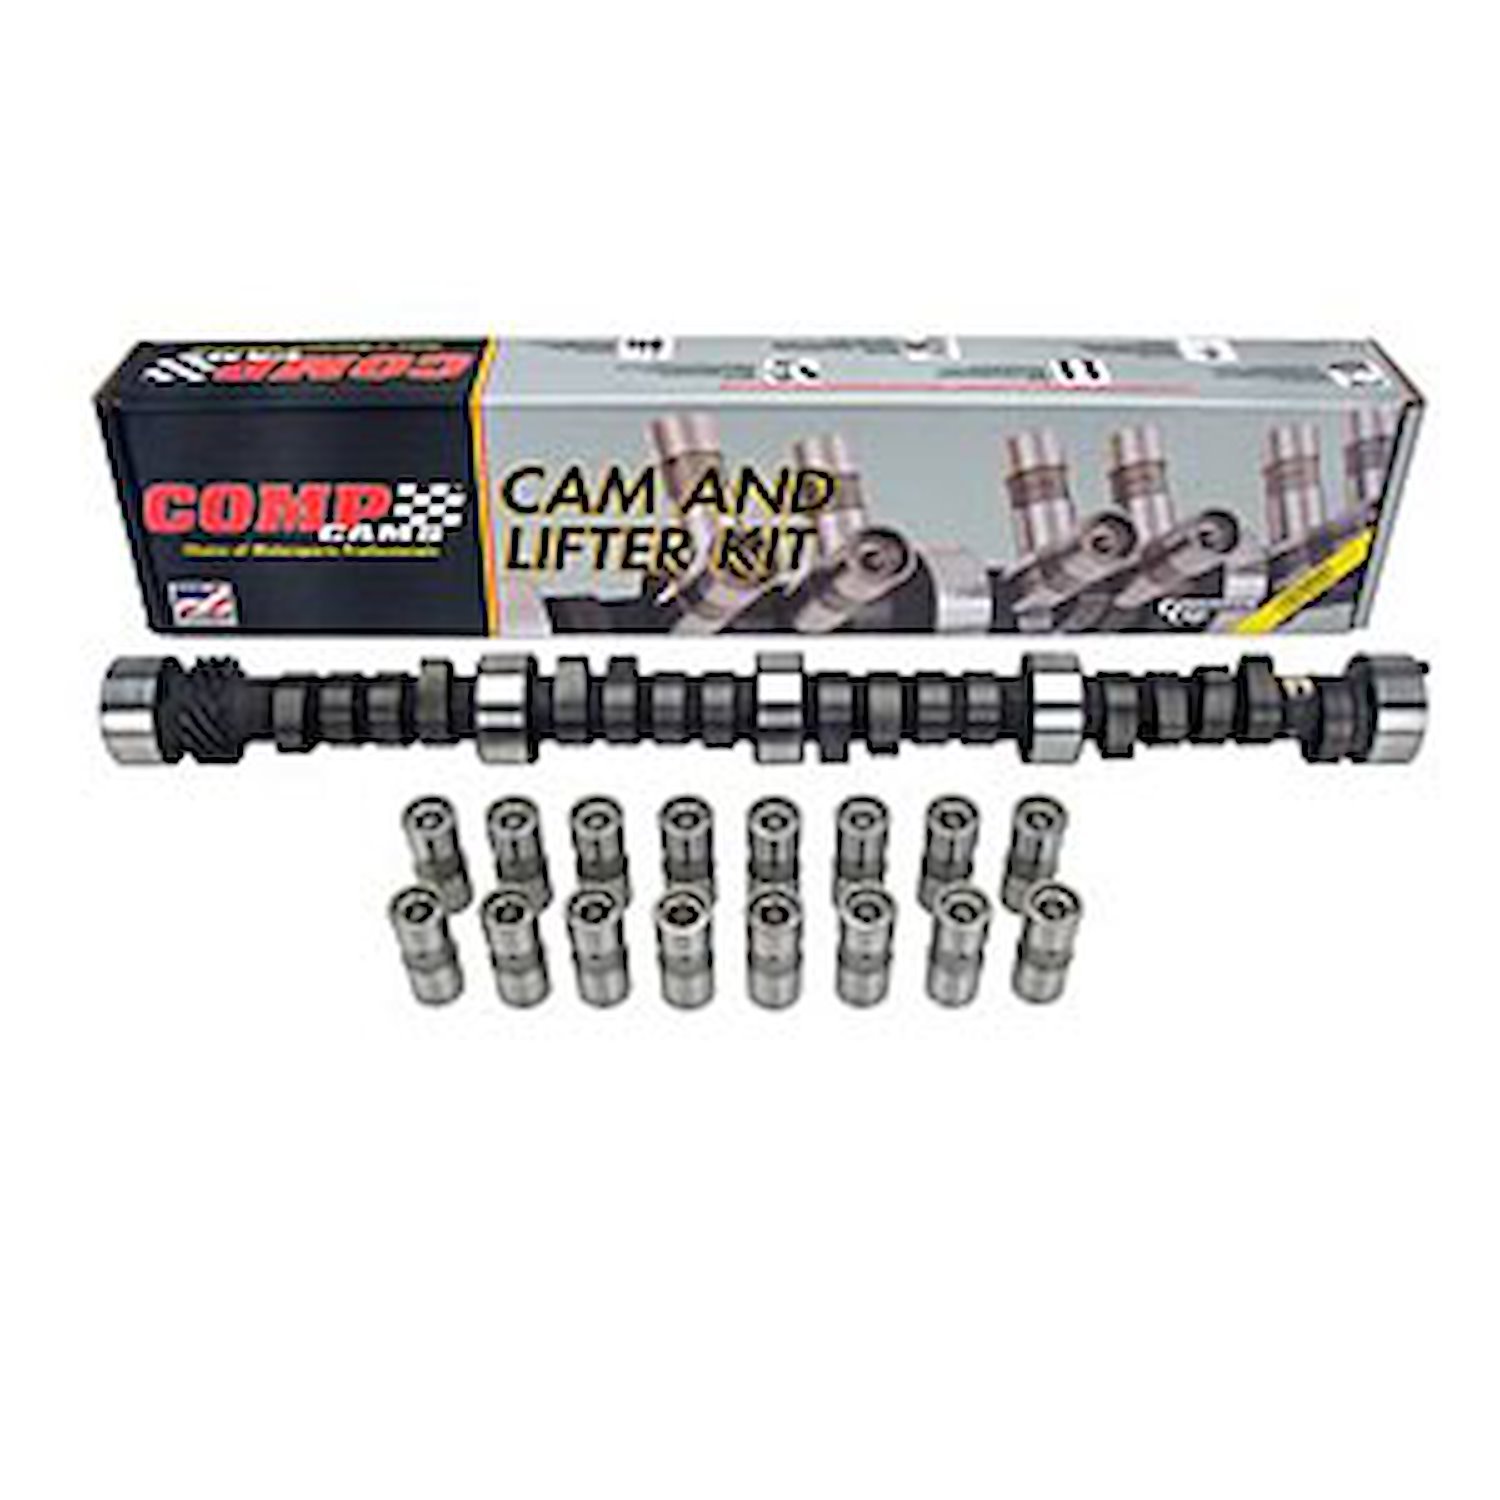 Mutha" Thumpr Hydraulic Flat Tappet Camshaft and Lifter Kit Lift .510"/.495" Duration 287/304 RPM Range 2000 to 5900